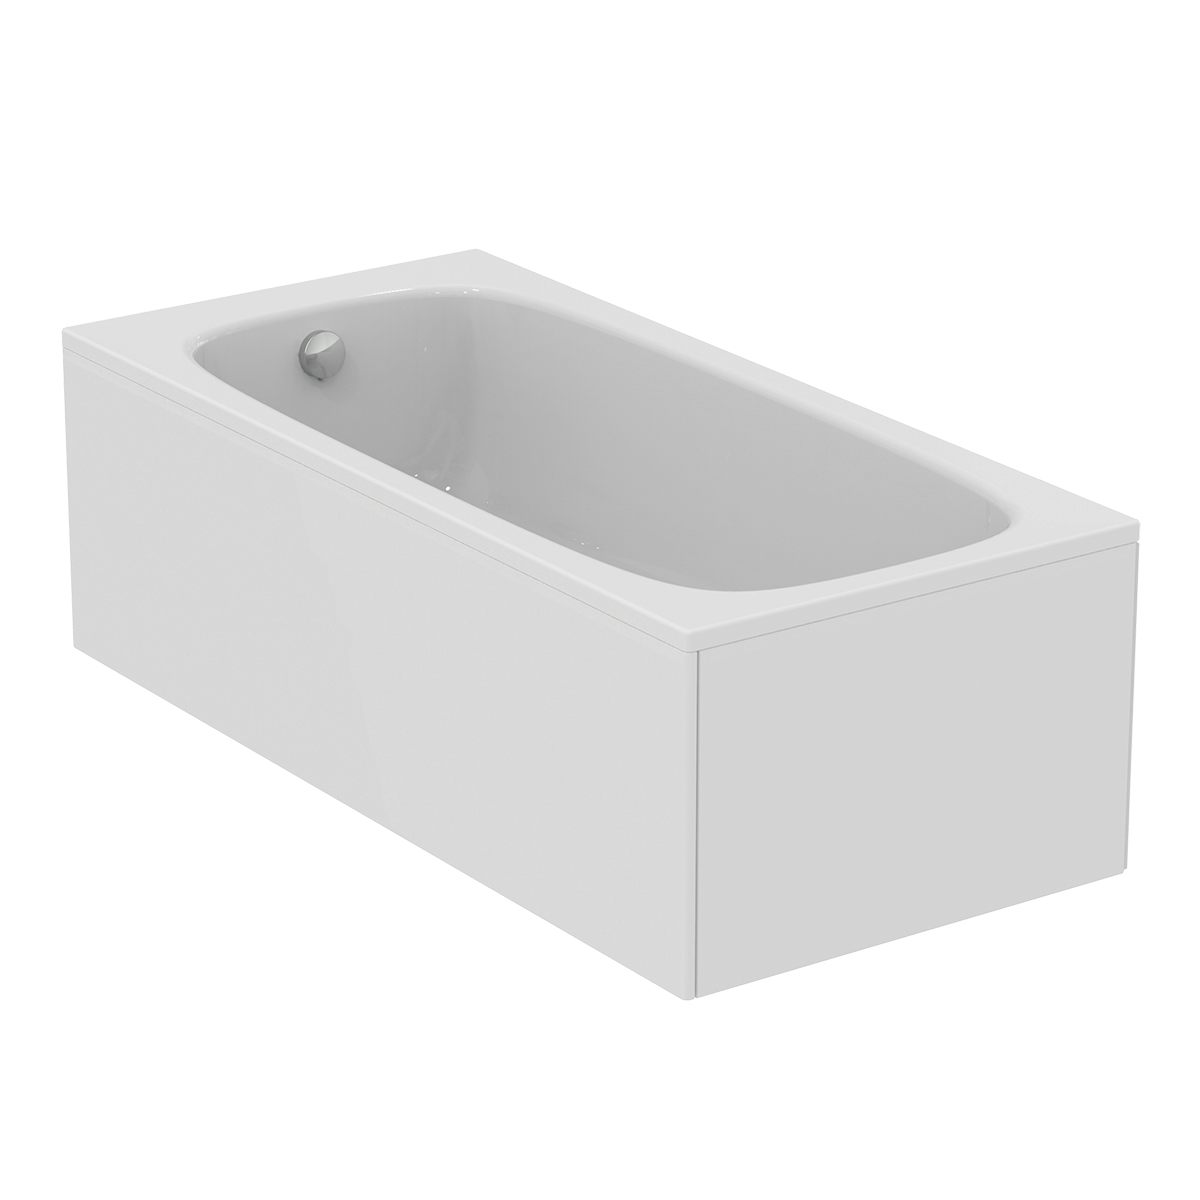 Ideal Standard i.life single ended bath 0 tap holes 1700 x 800mm